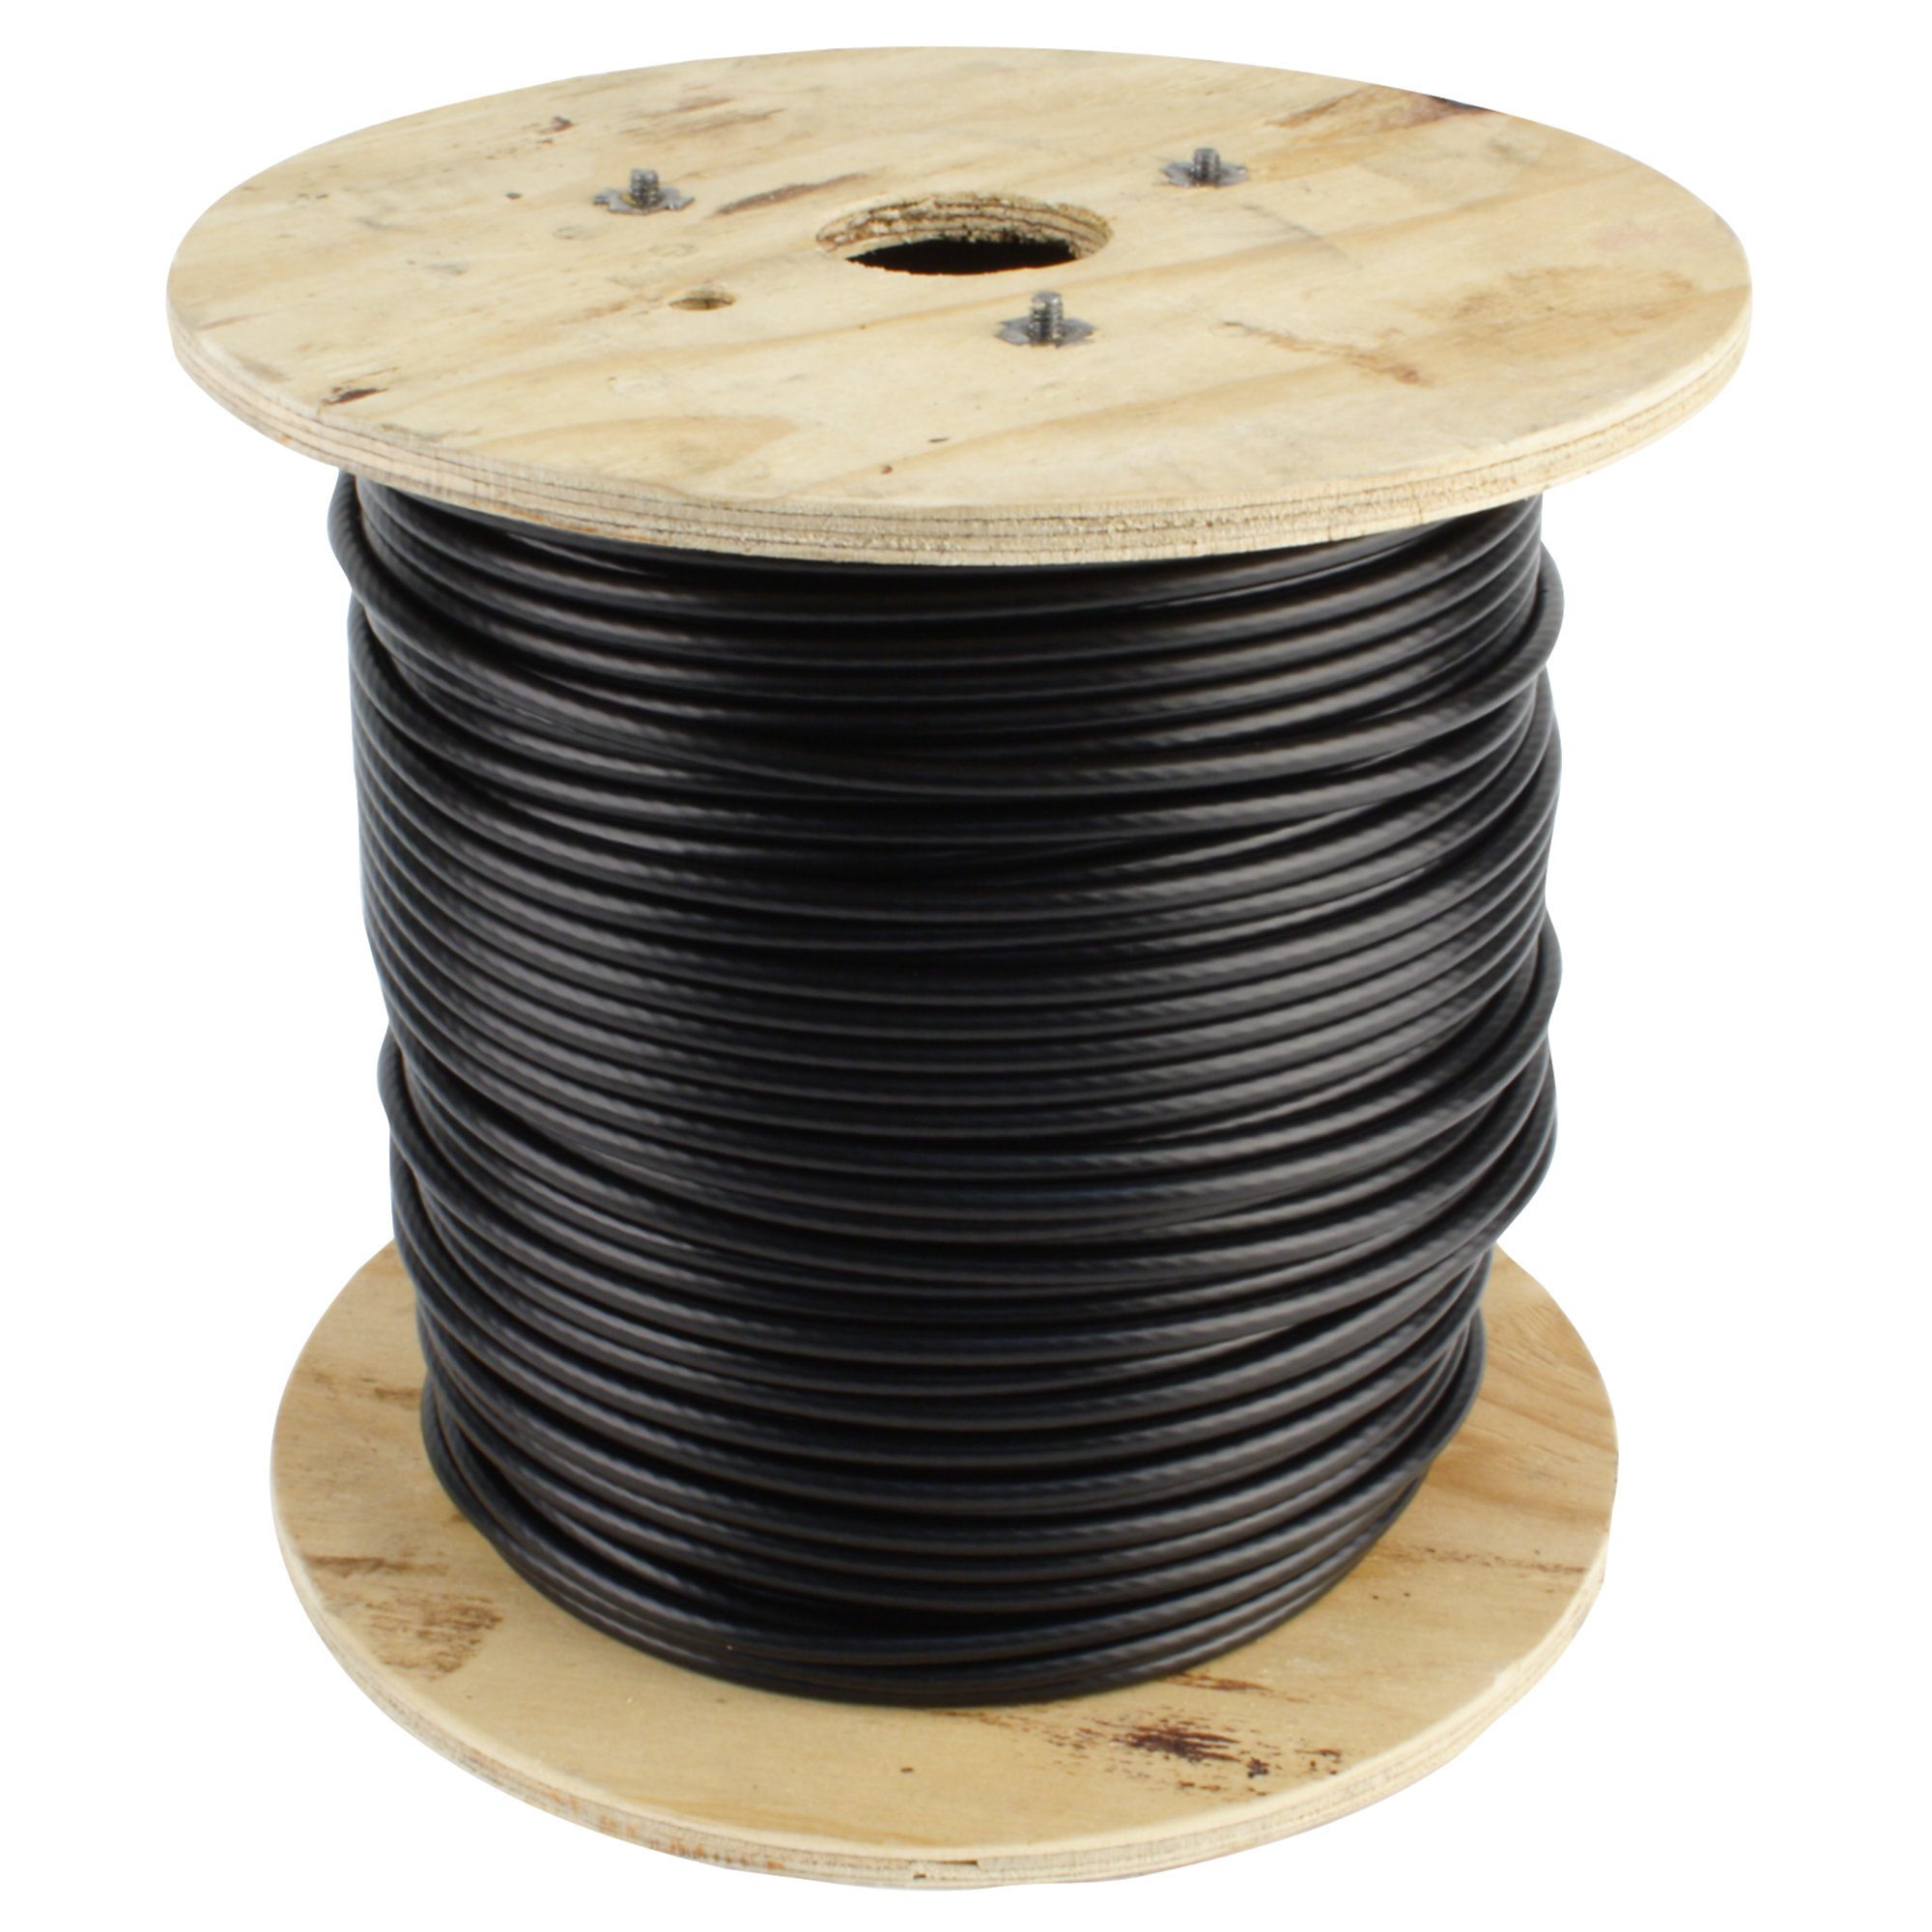 Cable 500FT Reel, 1/4" Diameter with Black Nylon Coating